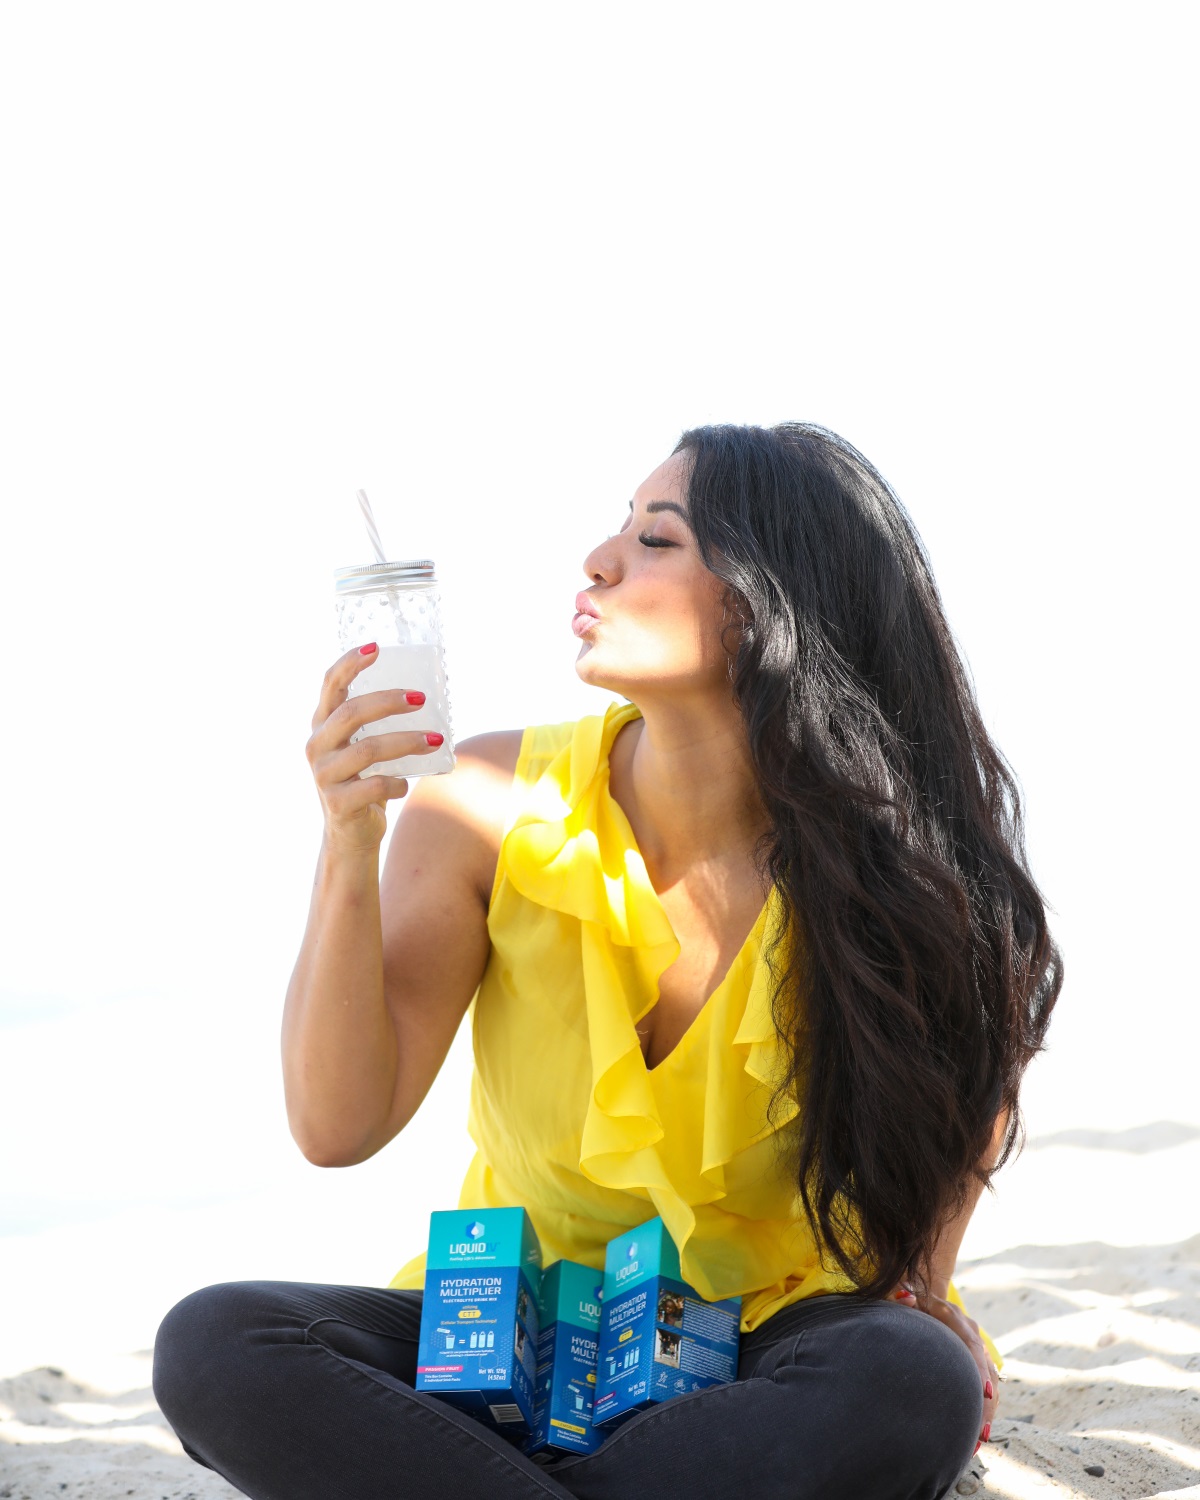 5 Benefits to Staying Hydrated | Liquid I.V. electrolyte drink mix | Orange County Fashion and Lifestyle Blog | Debbie Savage of To Thine Own Style Be True